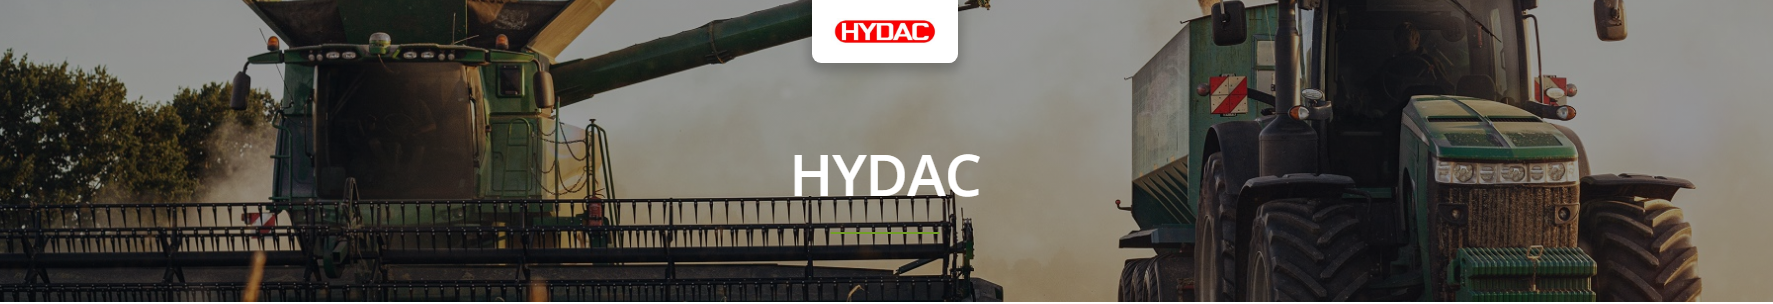 Hydac Measurement, Display and Analysis Systems